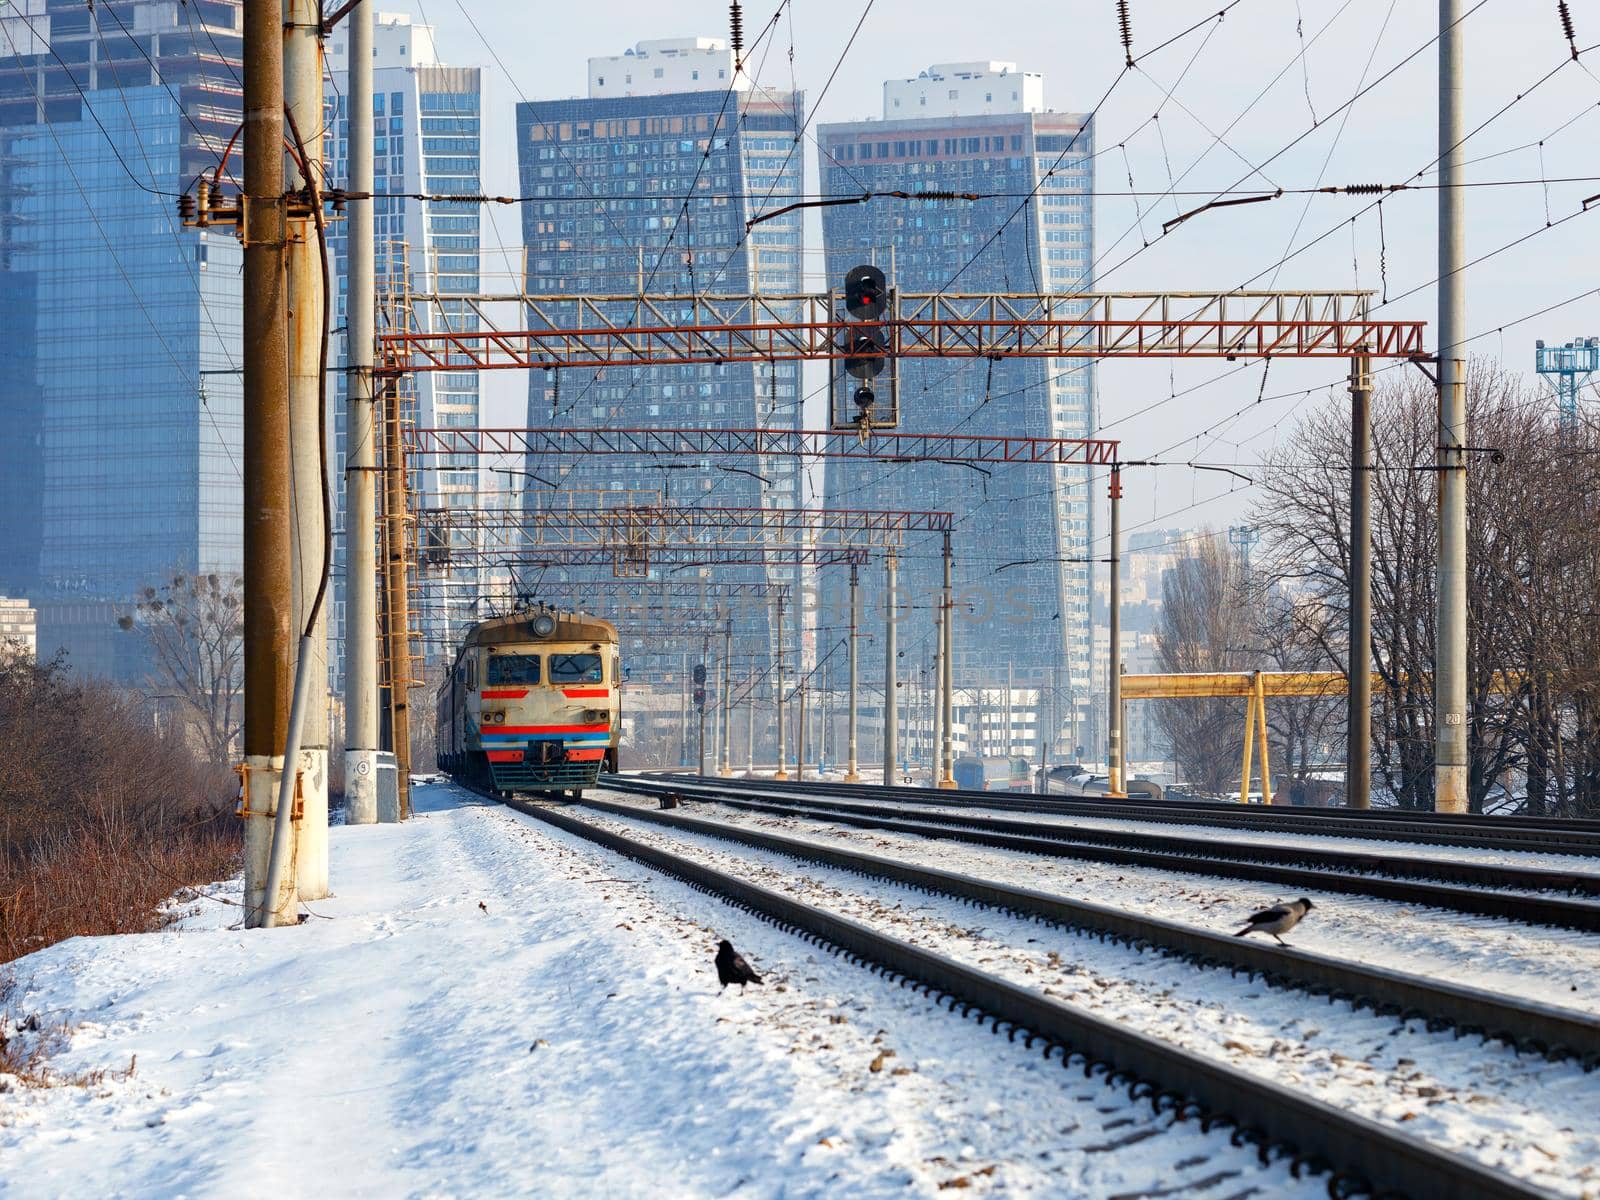 An old electric train moves on rails in the winter season against the backdrop of a cityscape and skyscrapers under construction in the light of sunlight.